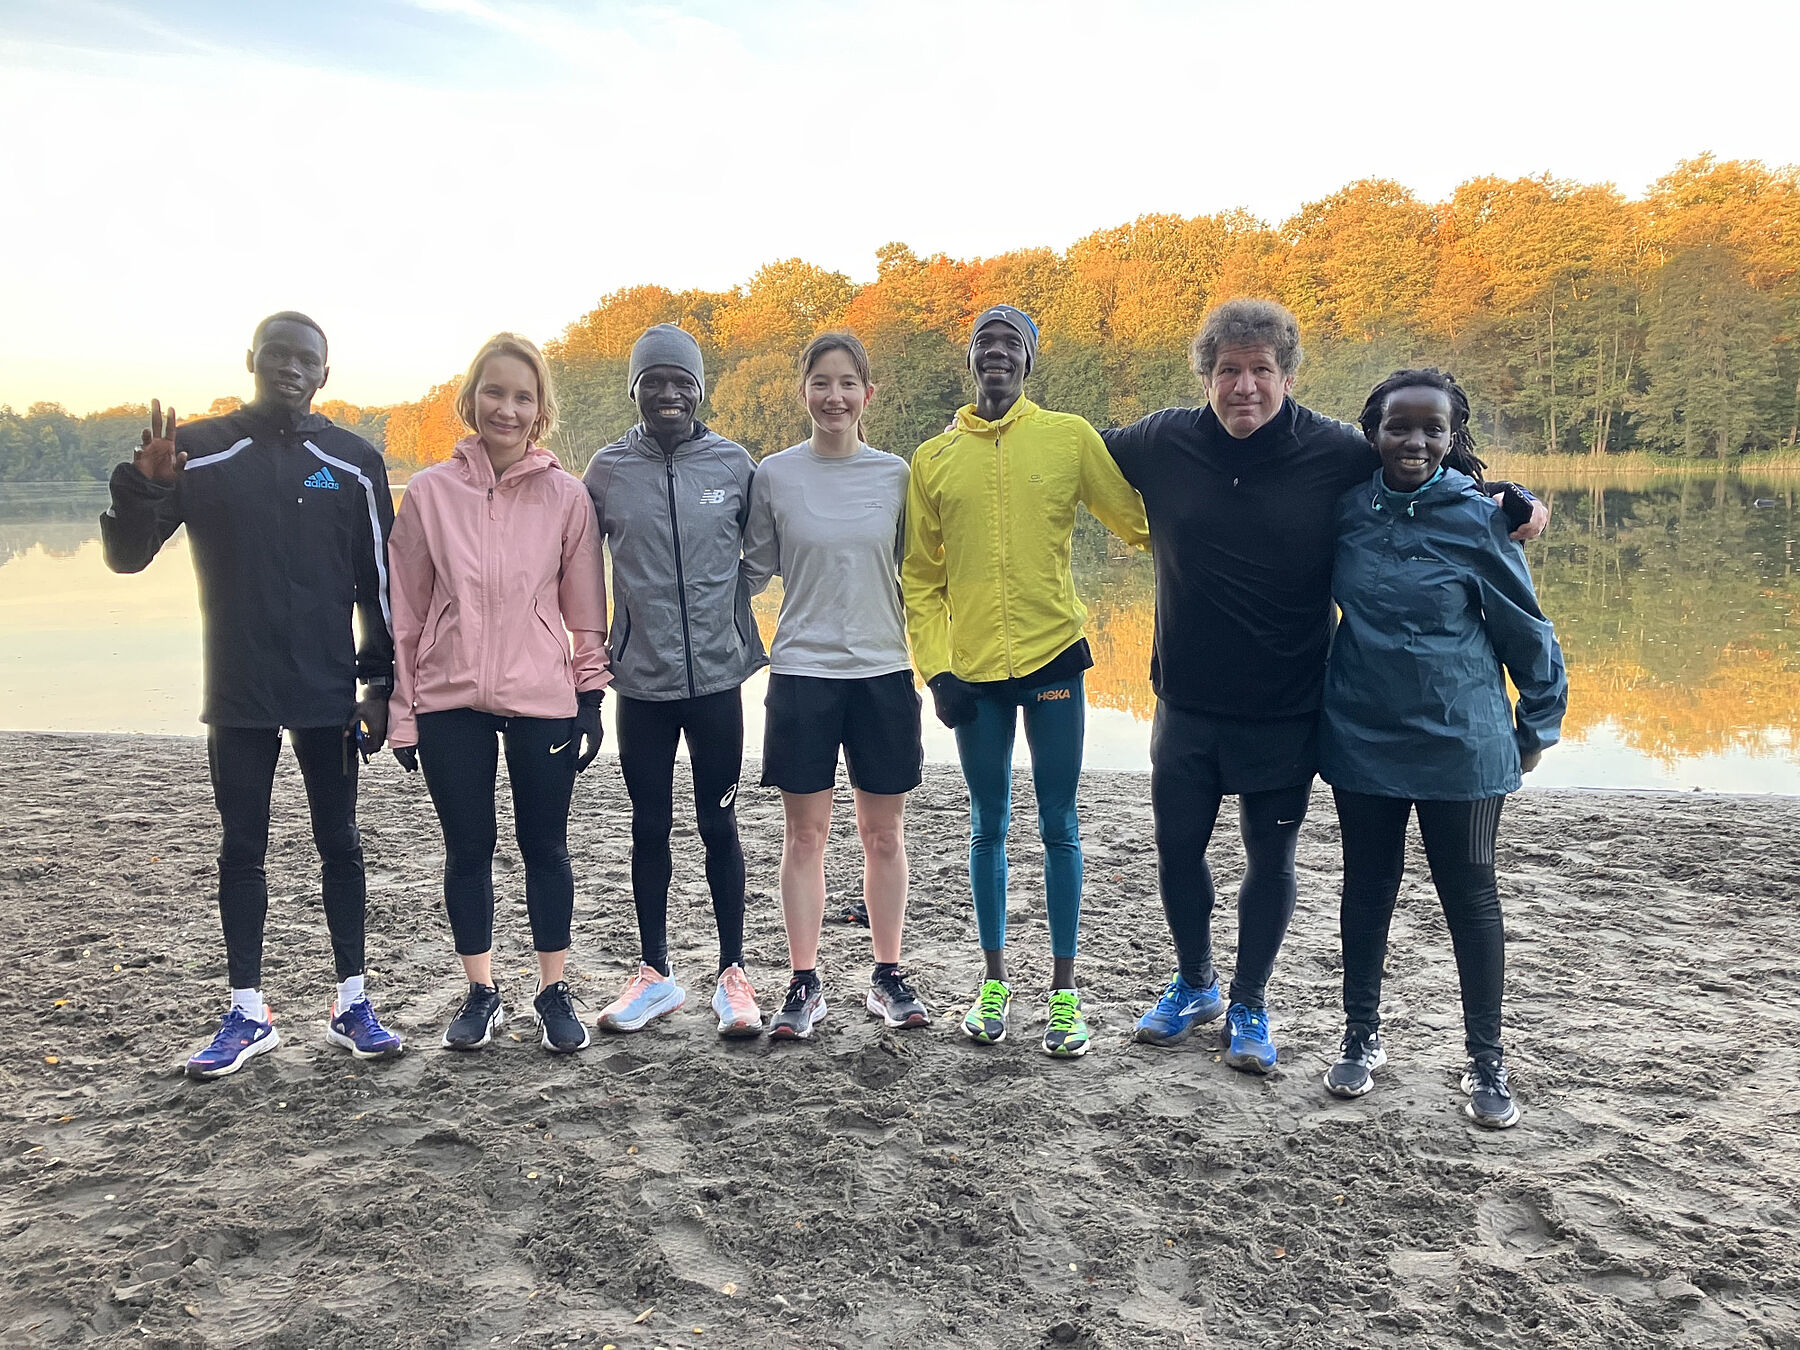 Seven runners stand in front of Grunewaldsee lake